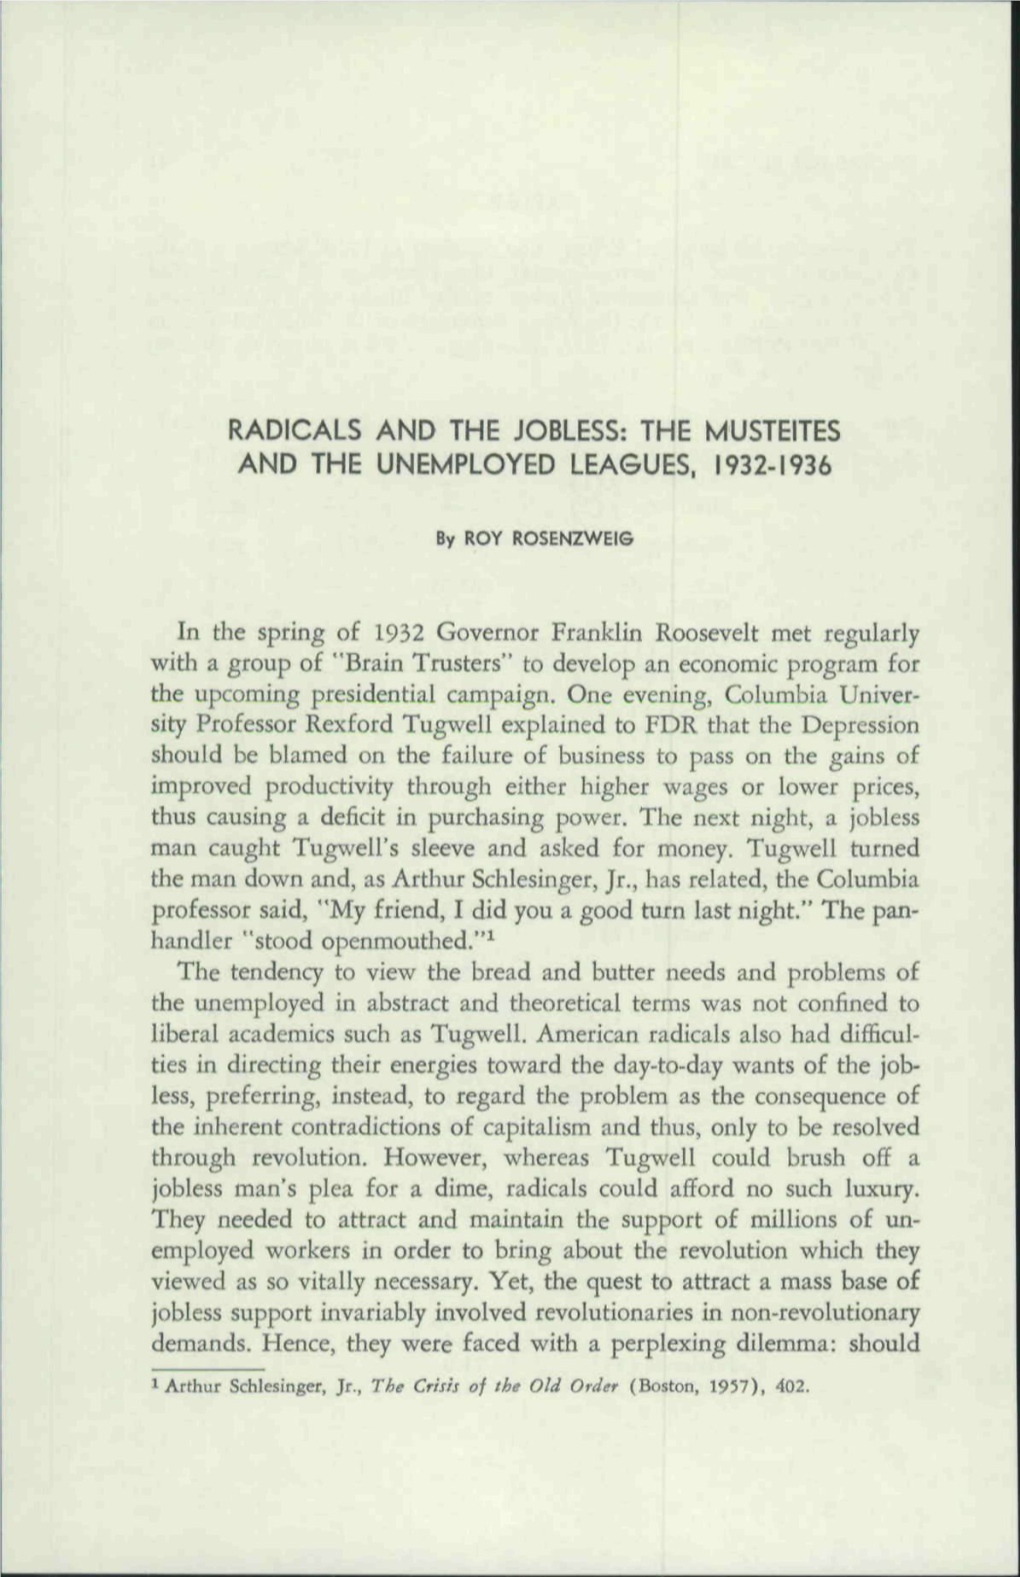 Radicals and the Jobless: the Musteites and the Unemployed Leagues, 1932-1936